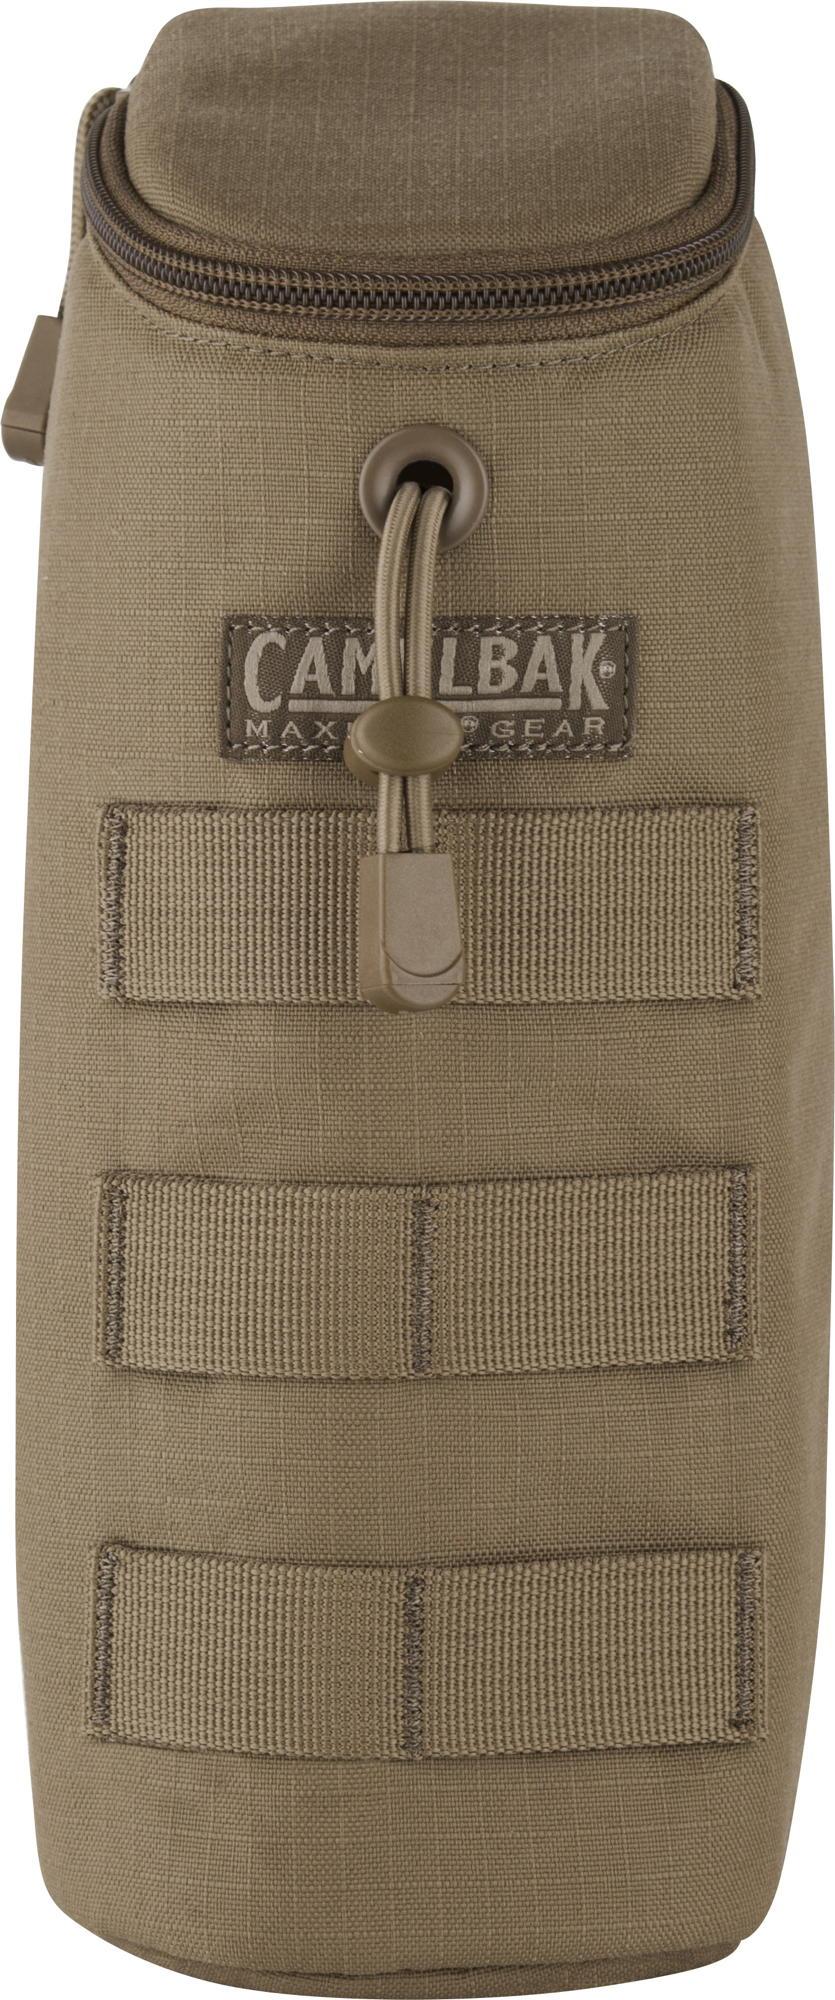 Gear - Pouches - Hydration - Camelbak Max Gear MOLLE Water Bottle Pouch